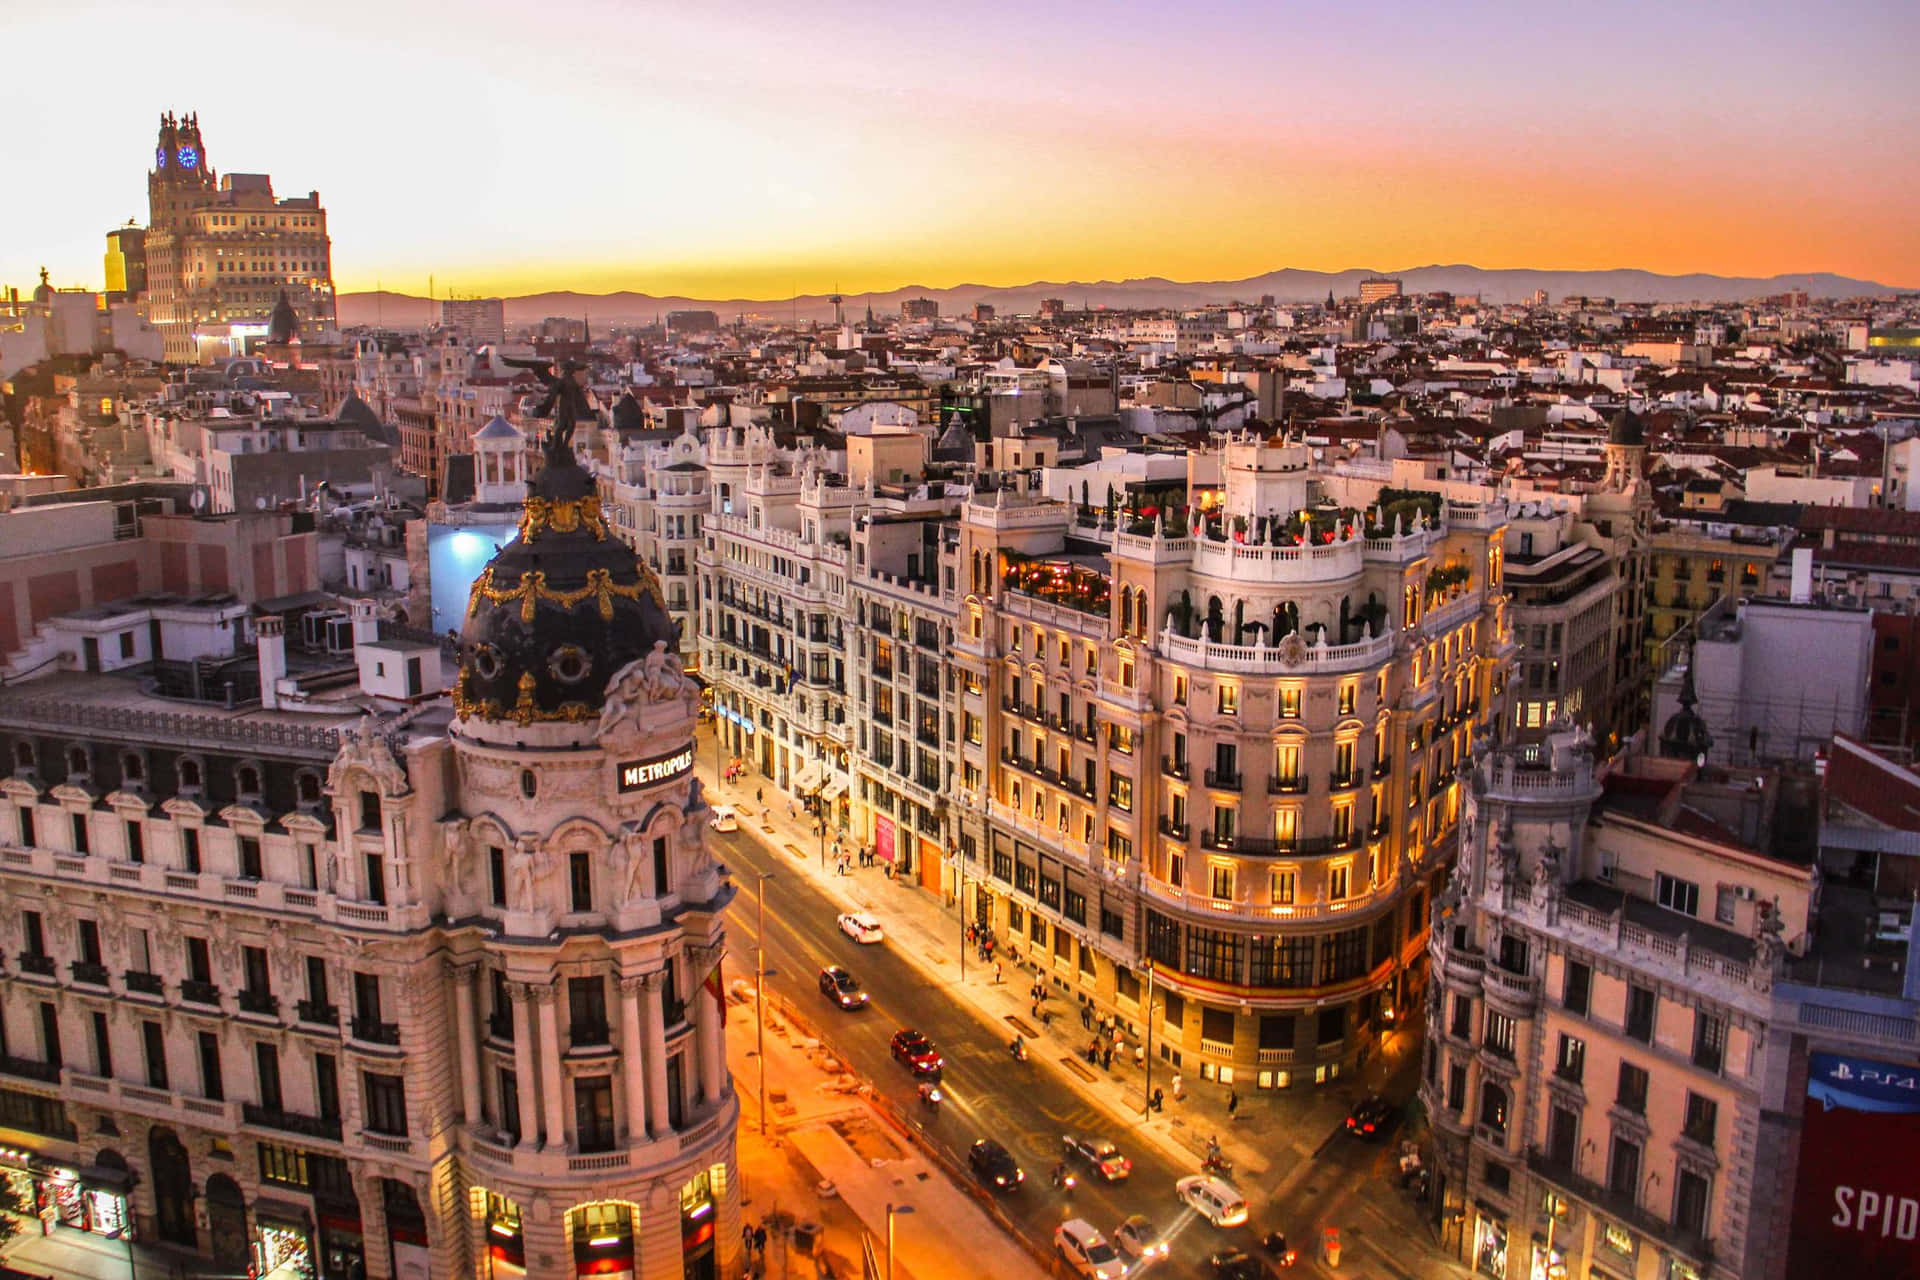 The scenic cities of Spain